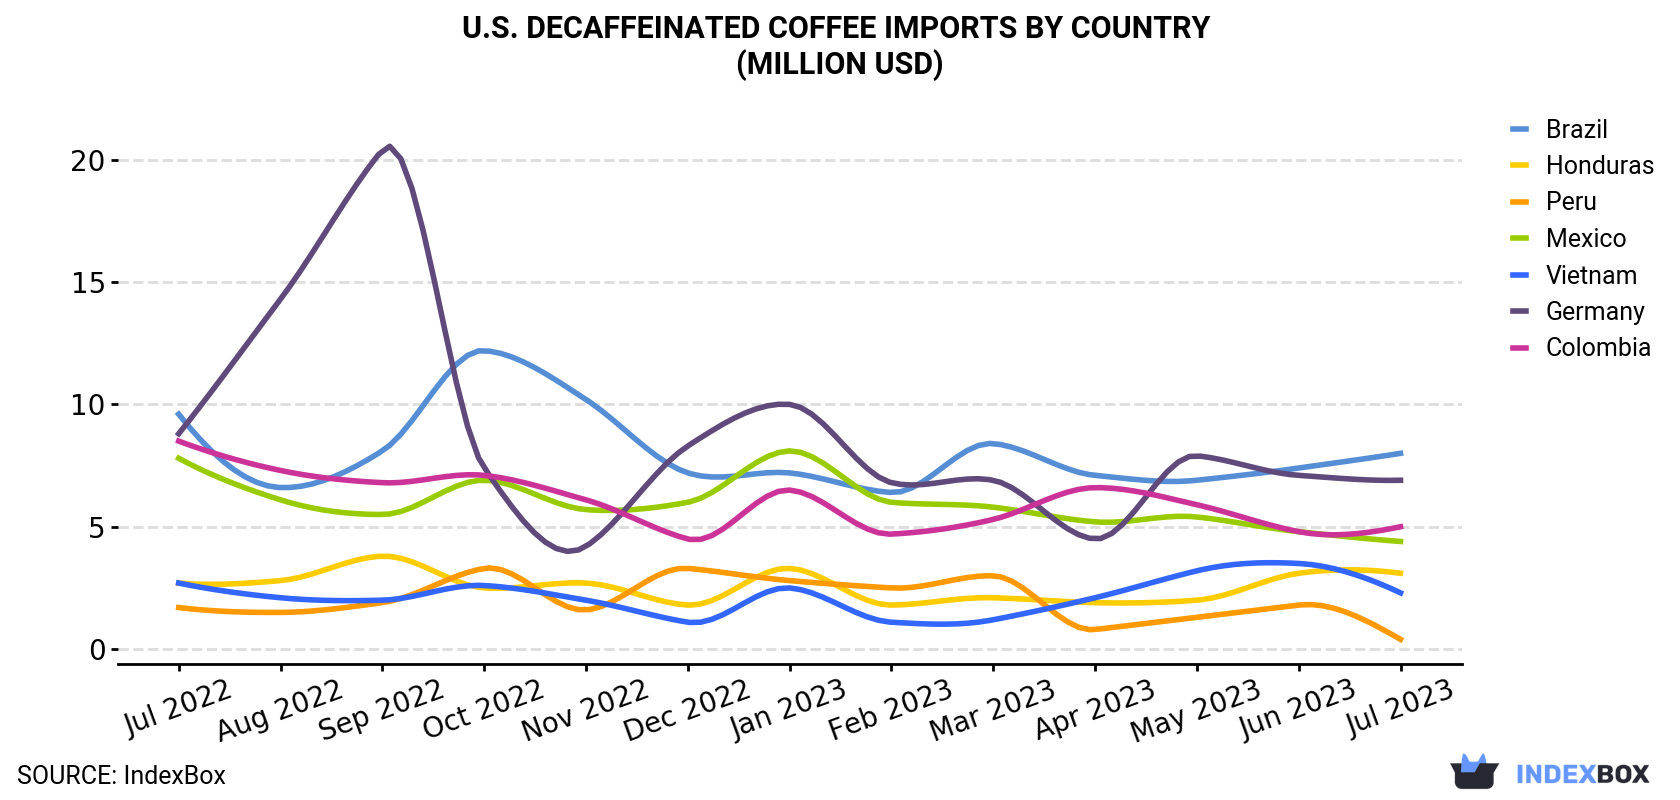 U.S. Decaffeinated Coffee Imports By Country (Million USD)